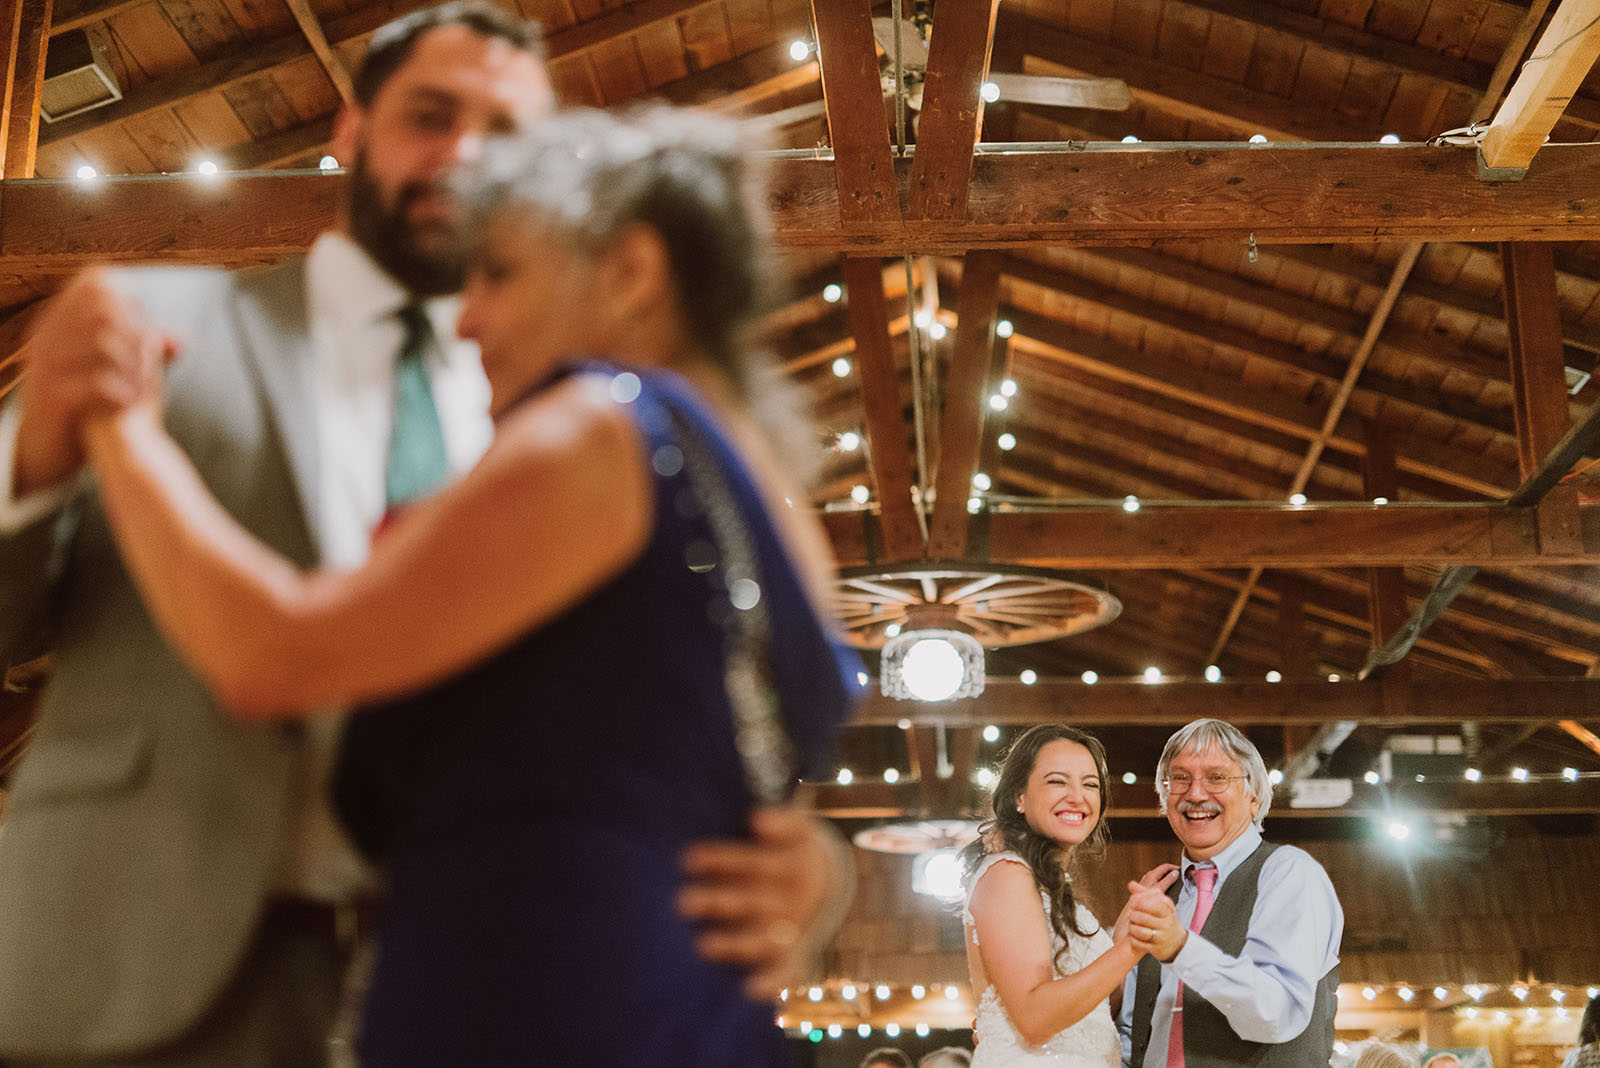 First dances with the newlyweds' parents at a Cedarville Lodge Wedding